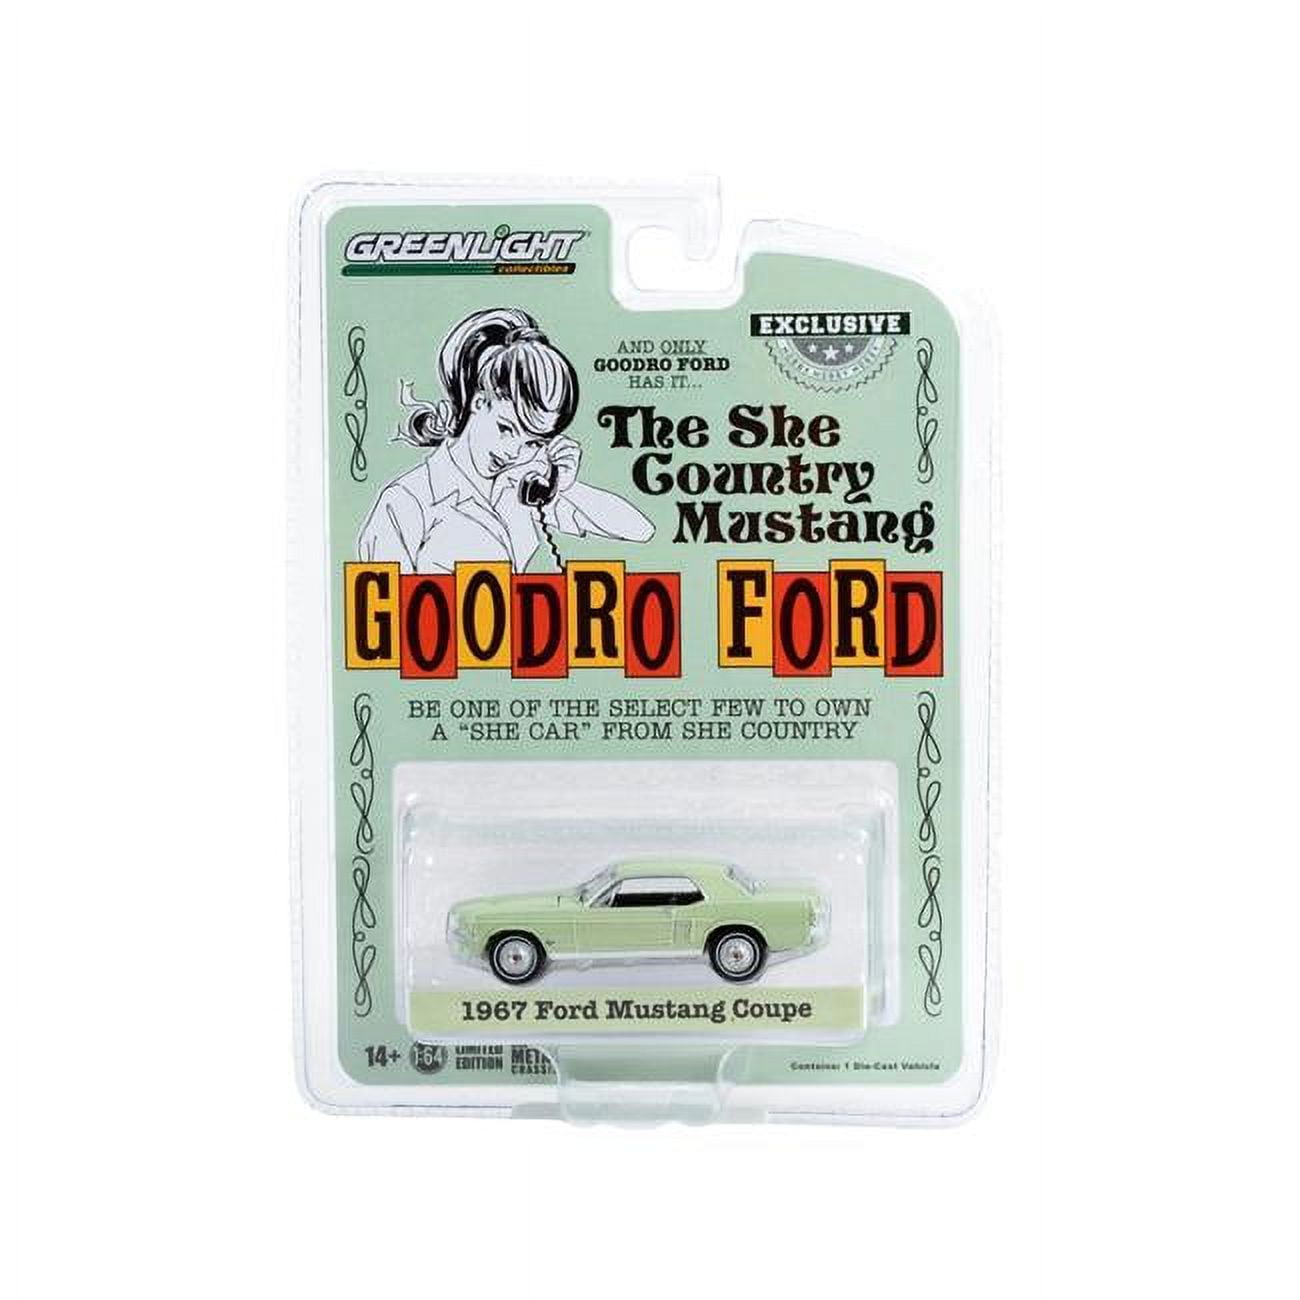 30353 1967 Ford Mustang Limelite Green She Country Special Bill Goodro Ford Denver Colorado Hobby Exclusive Series 1-64 Diecast Model Car -  GreenLight